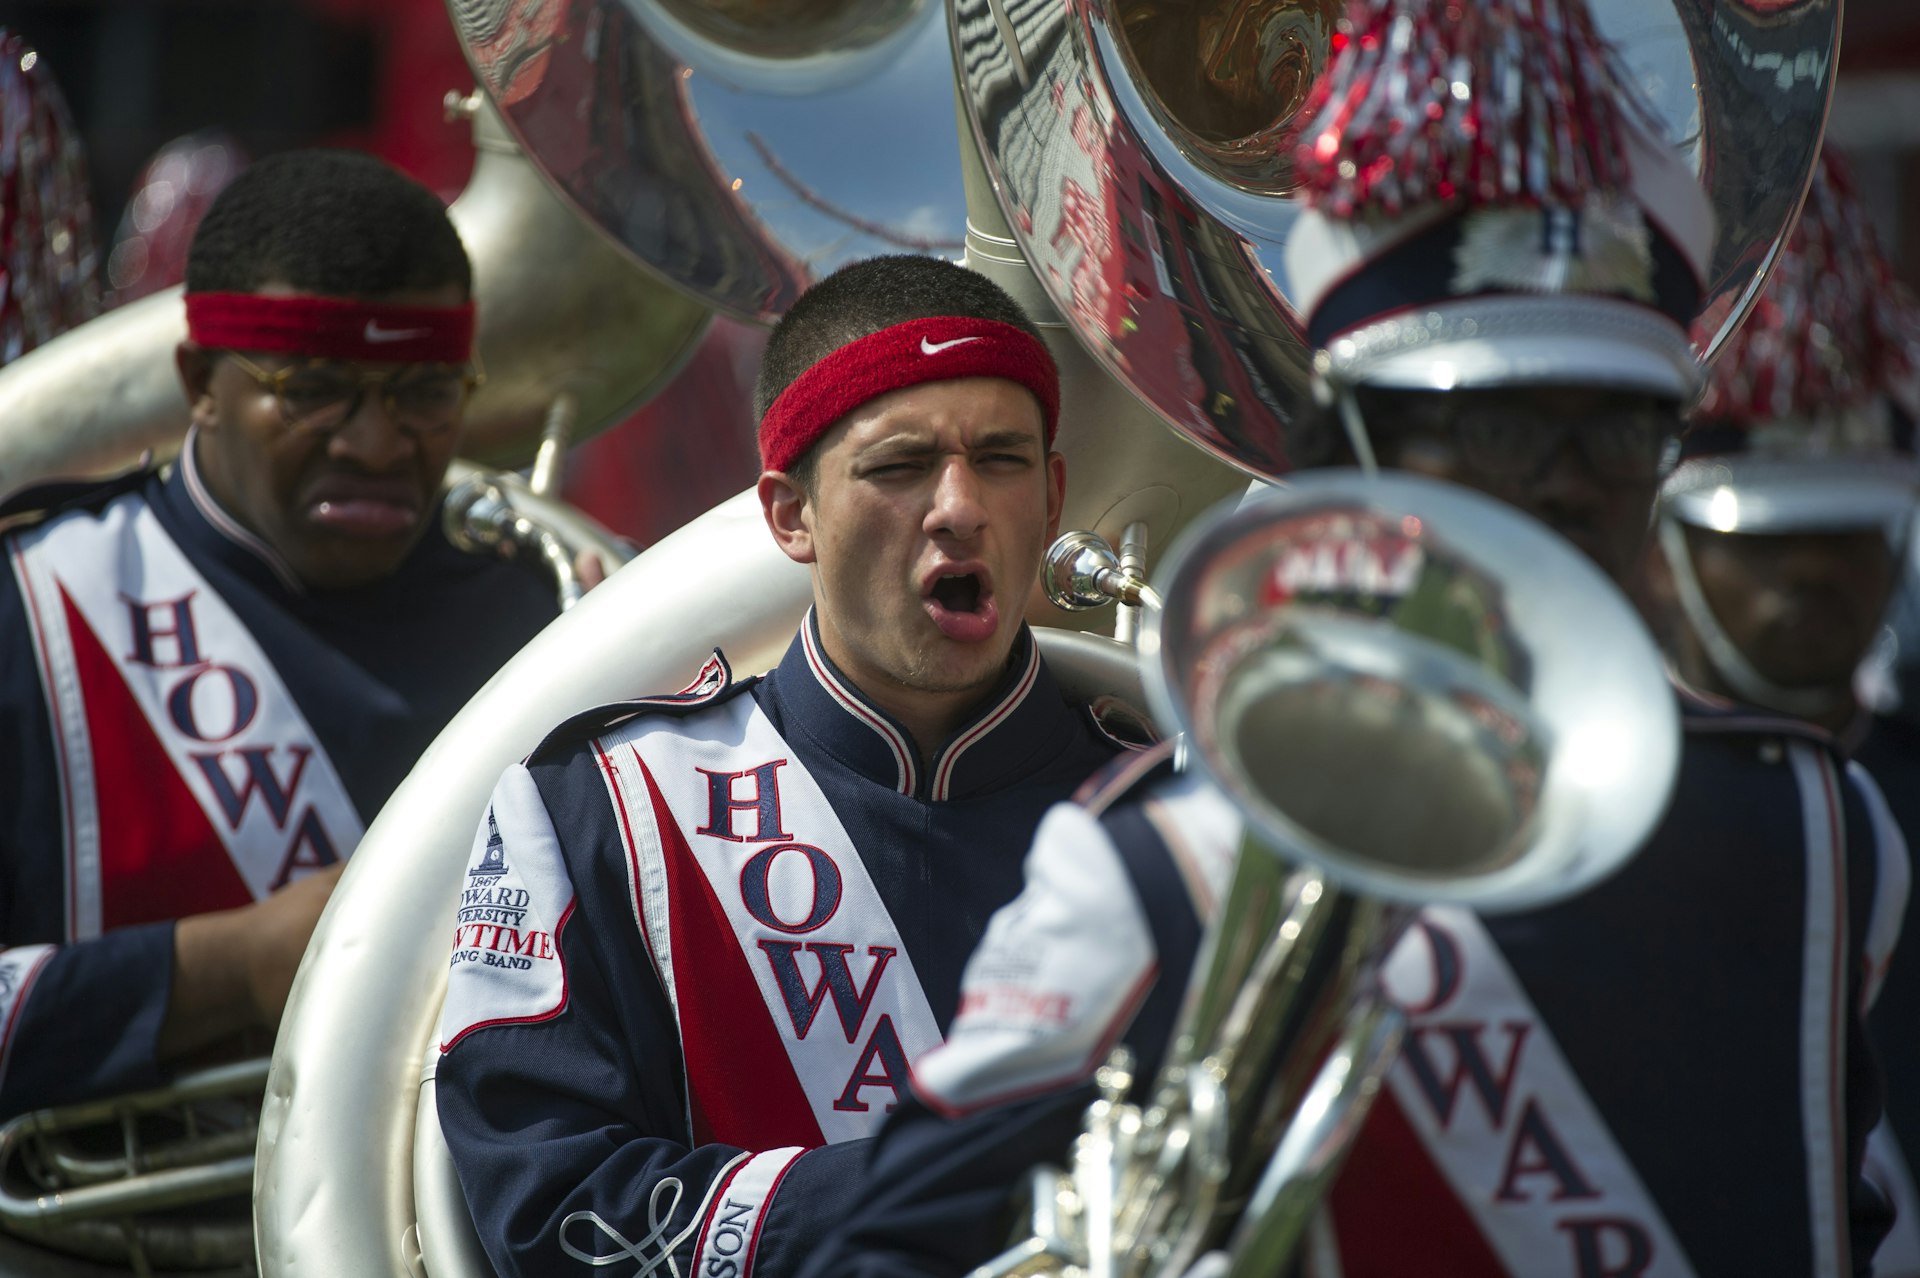 At Howard, the marching band overshadows the actual game © Kostas Lymperopoulos/CSM/REX/Shutterstock 